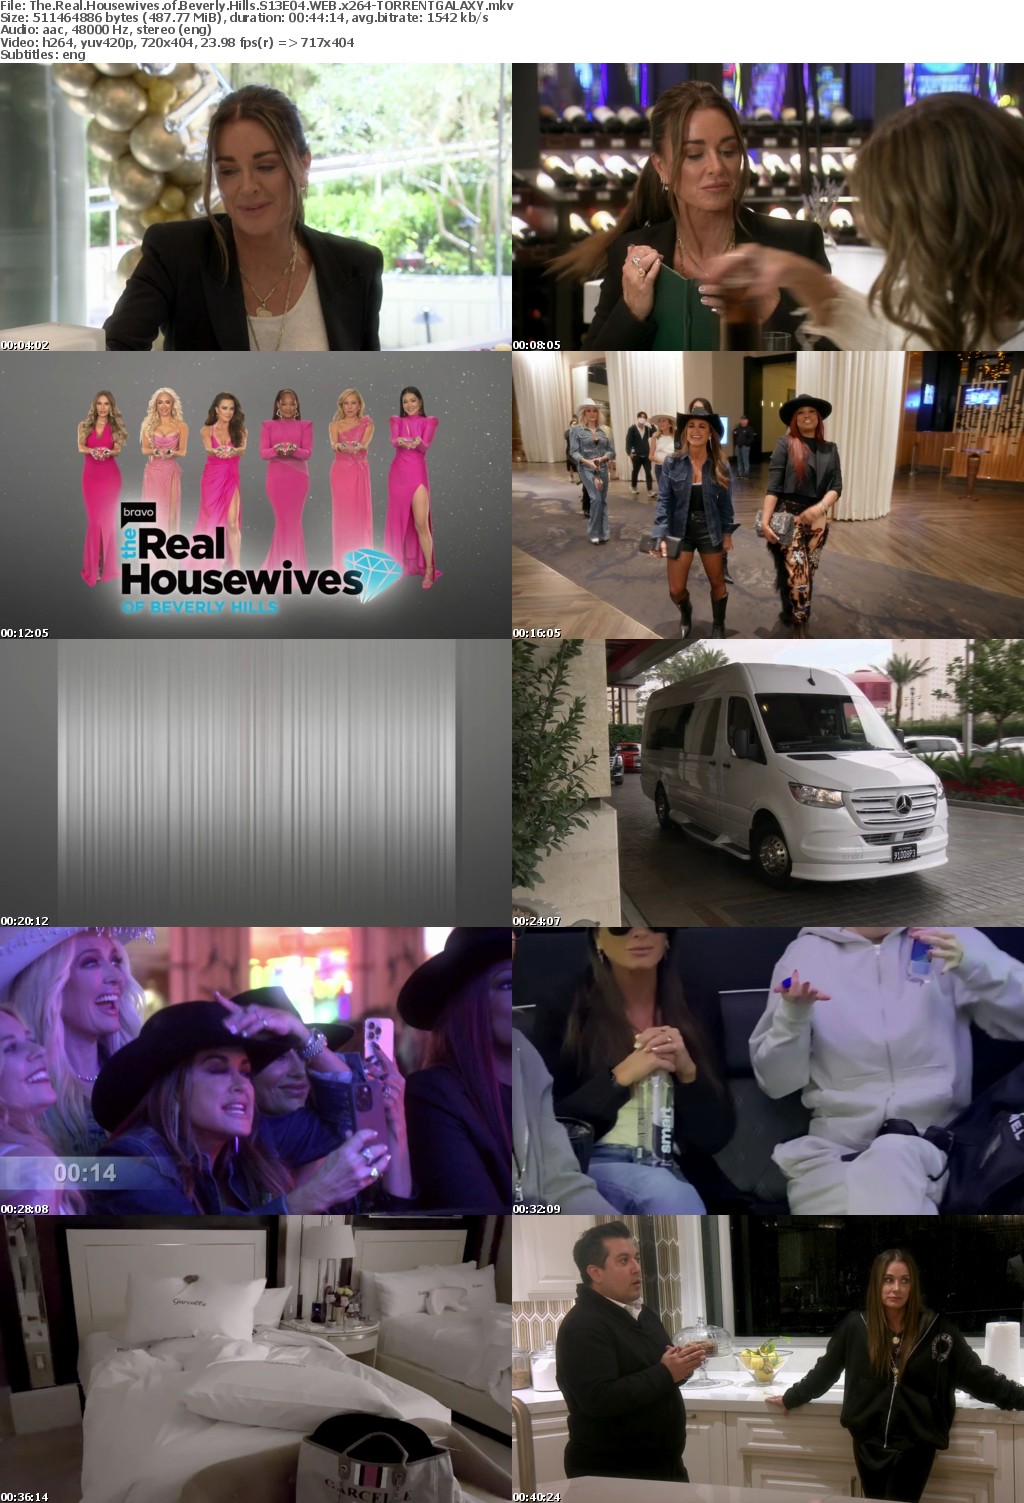 The Real Housewives of Beverly Hills S13E04 WEB x264-GALAXY